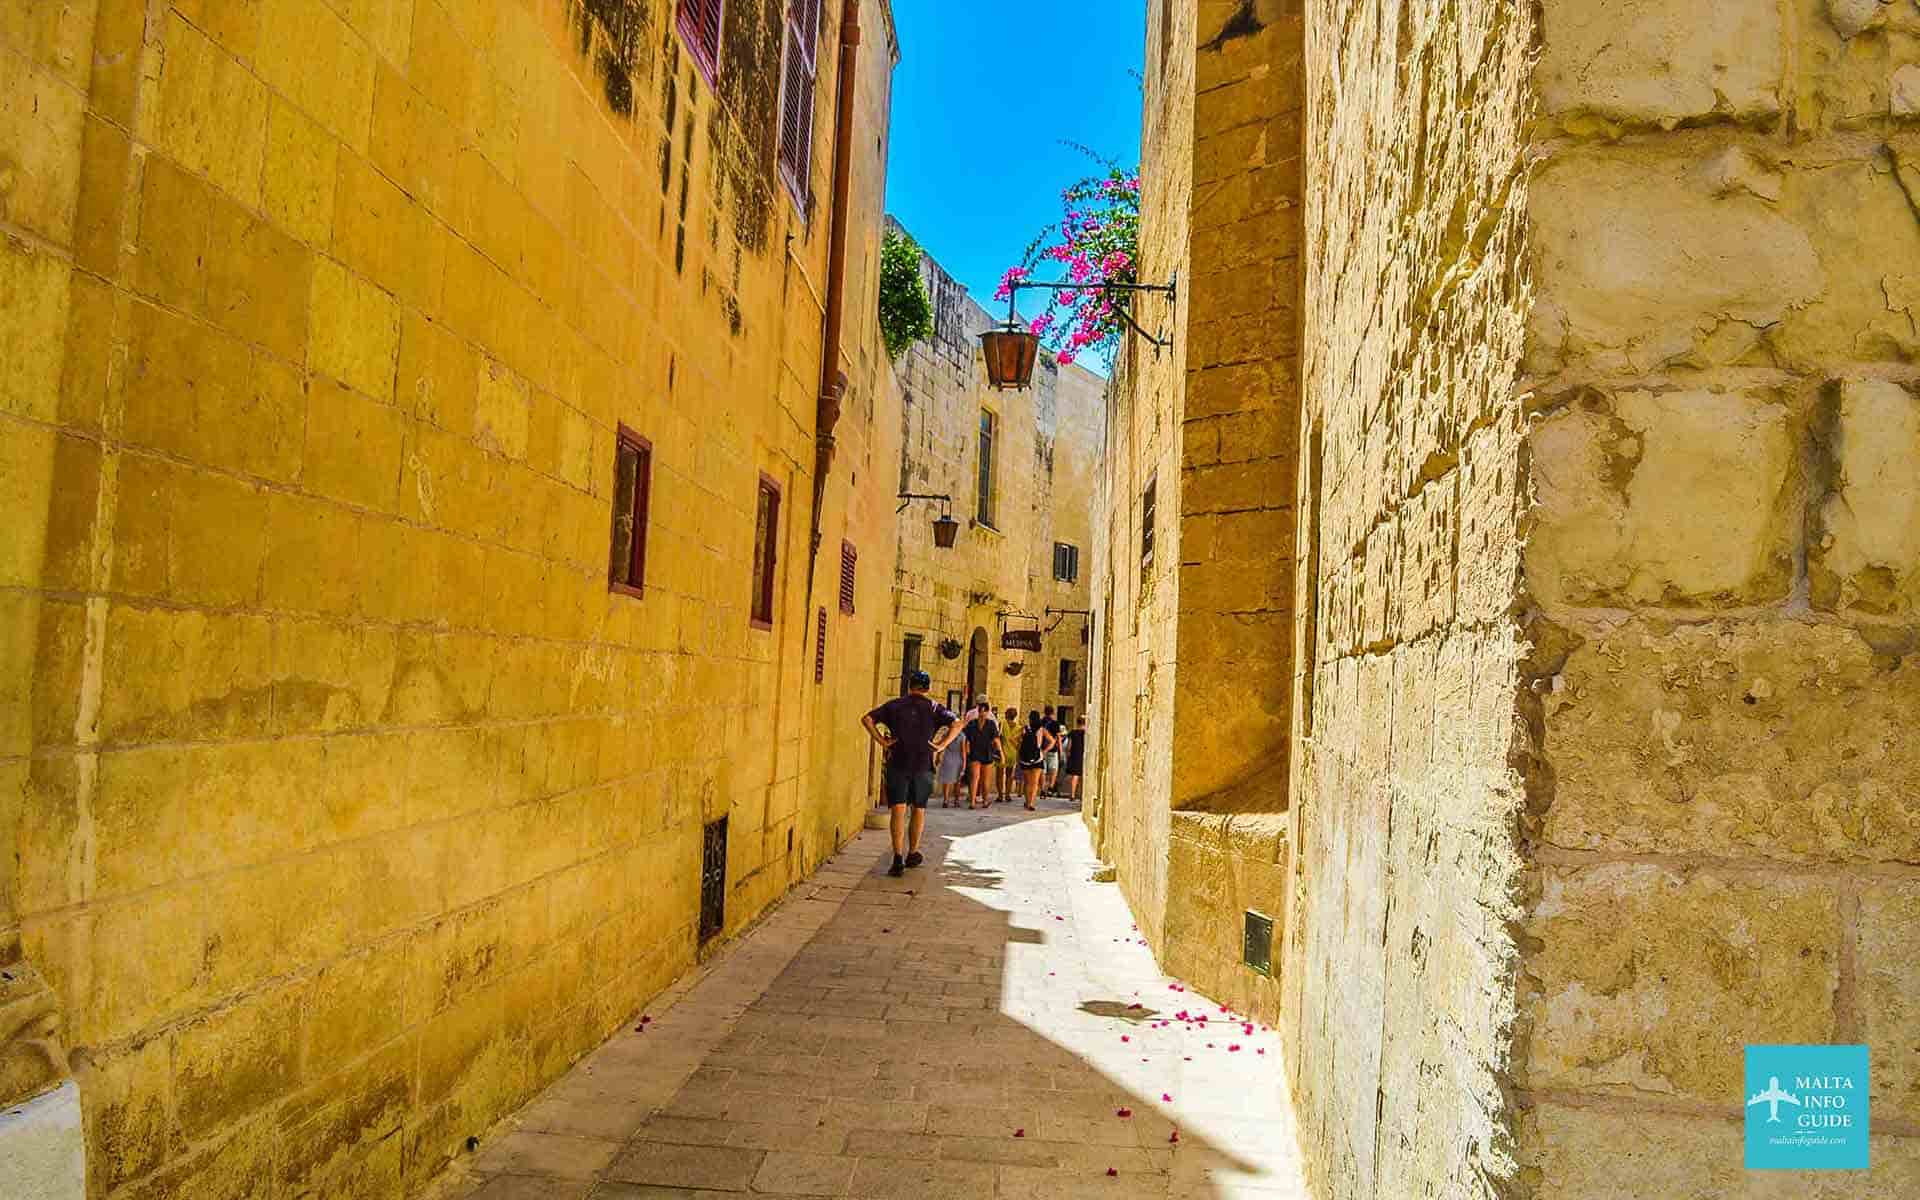 Wandering the streets of Mdina the Silent city.